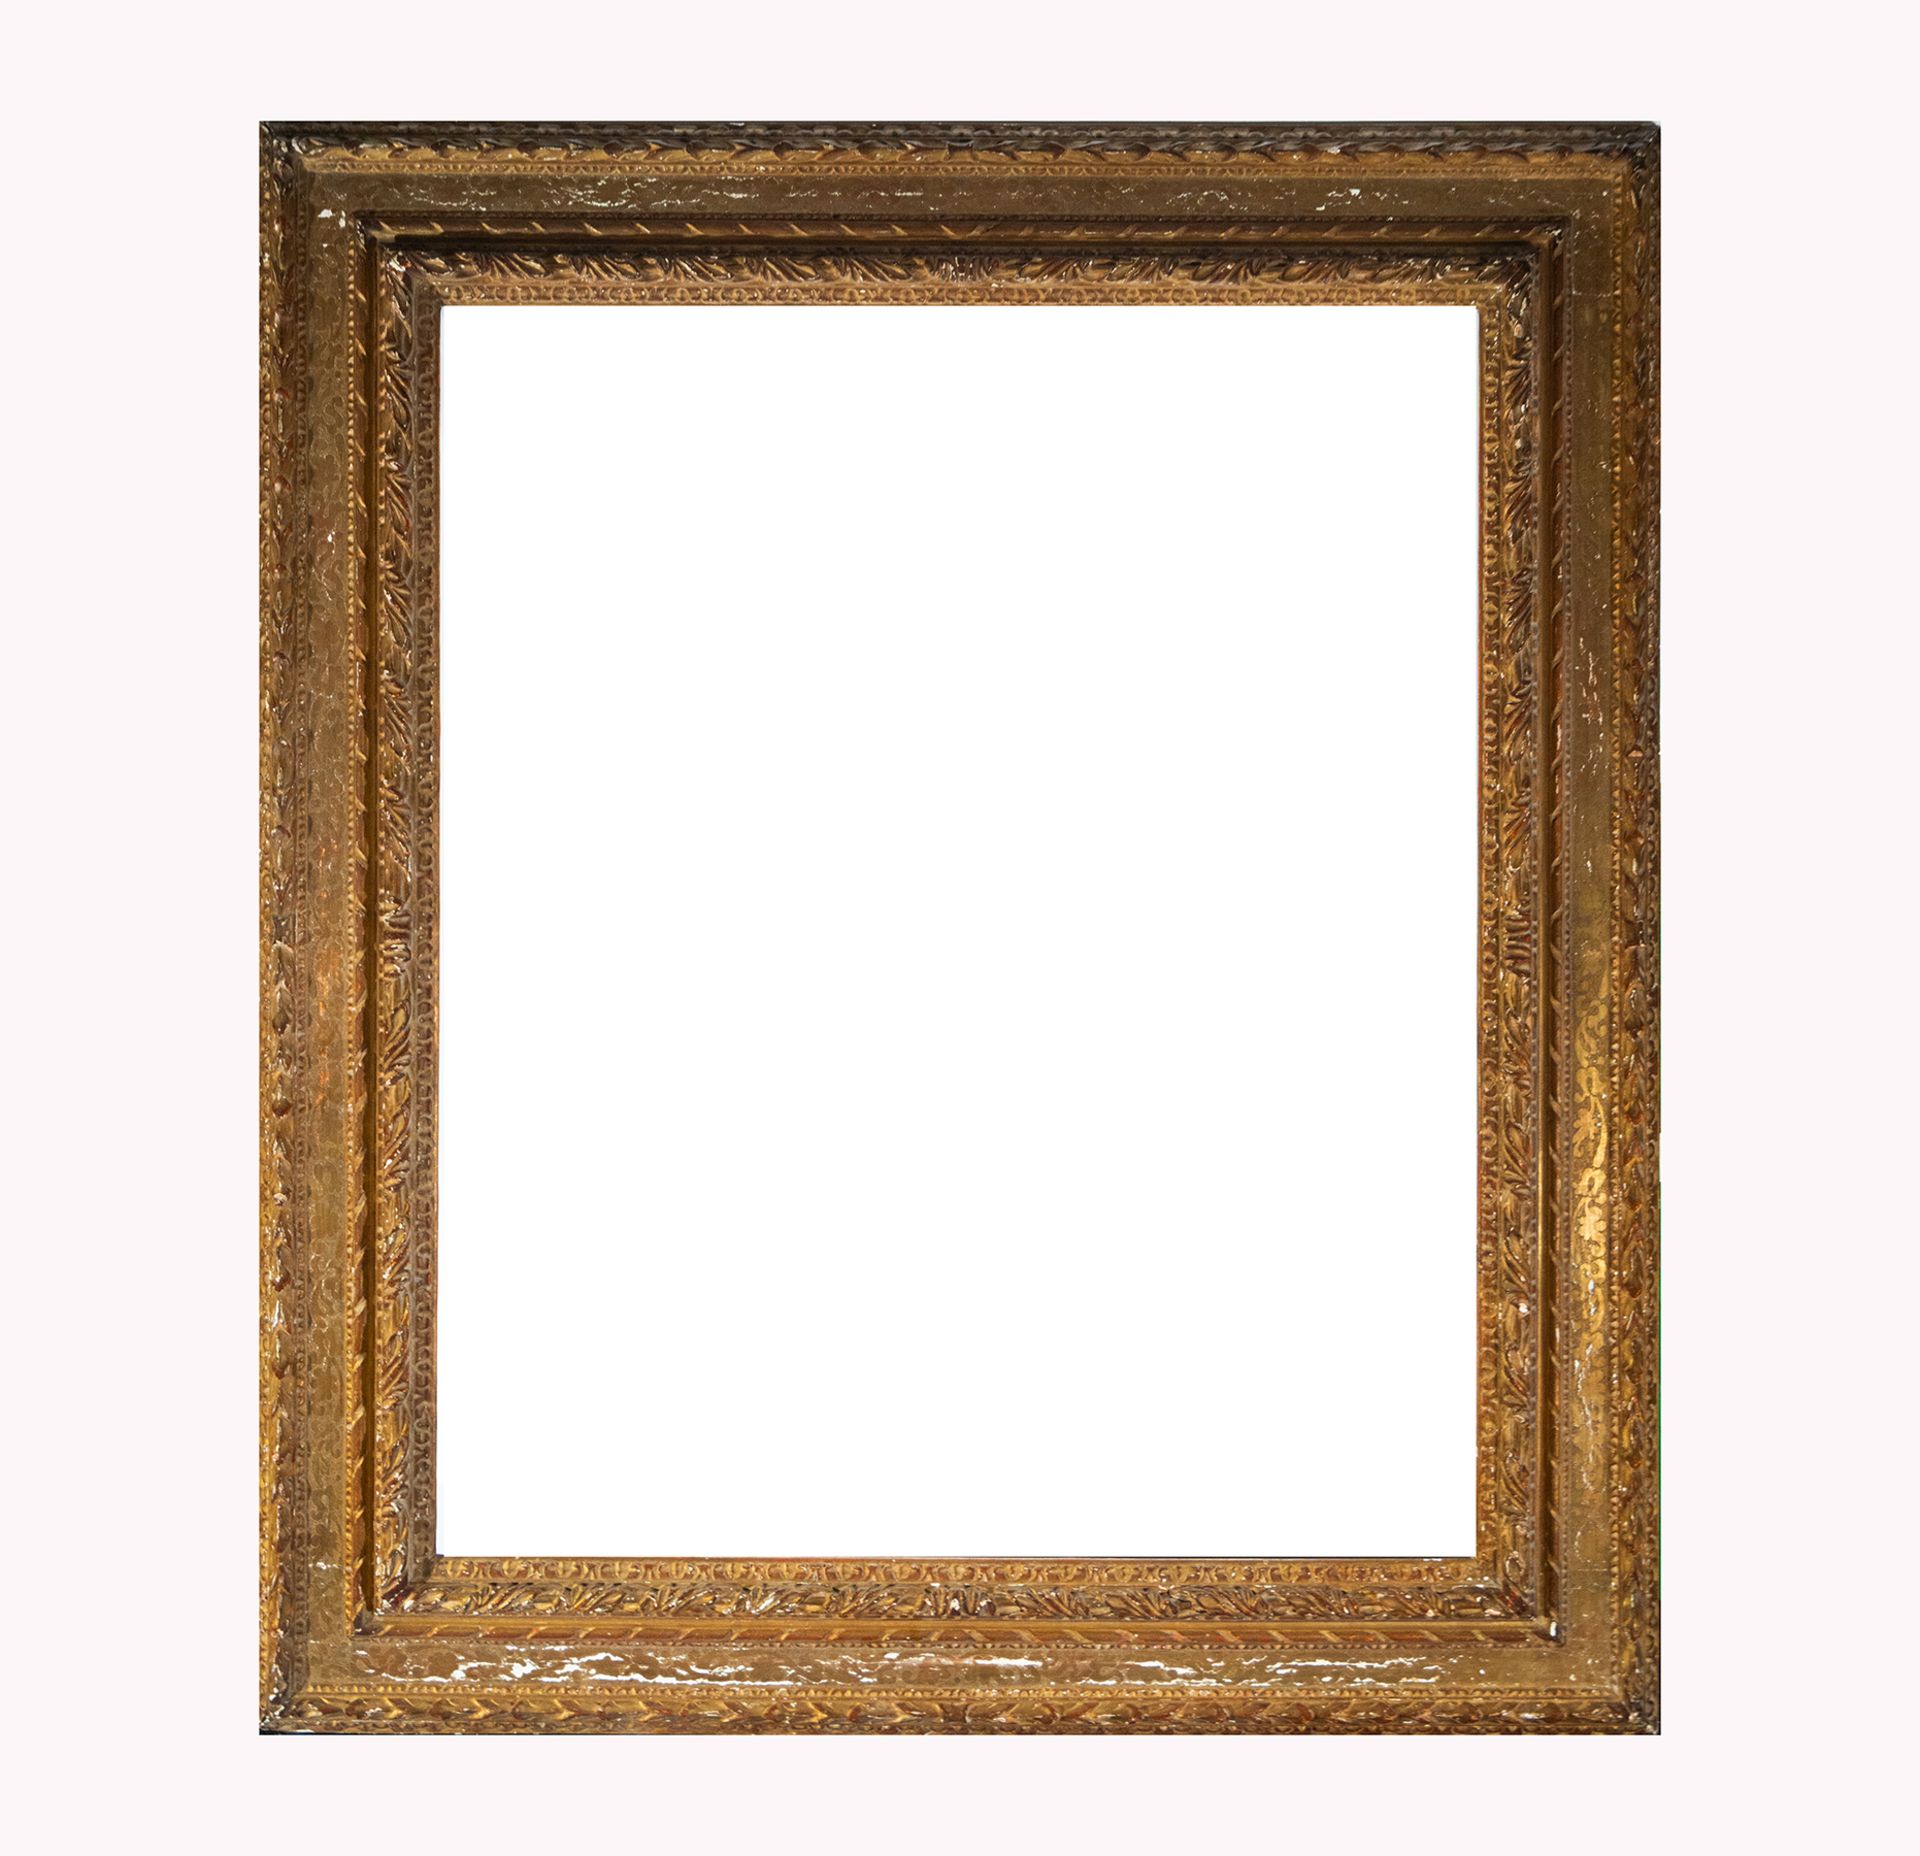 Important Spanish frame in gilded wood, 17th century